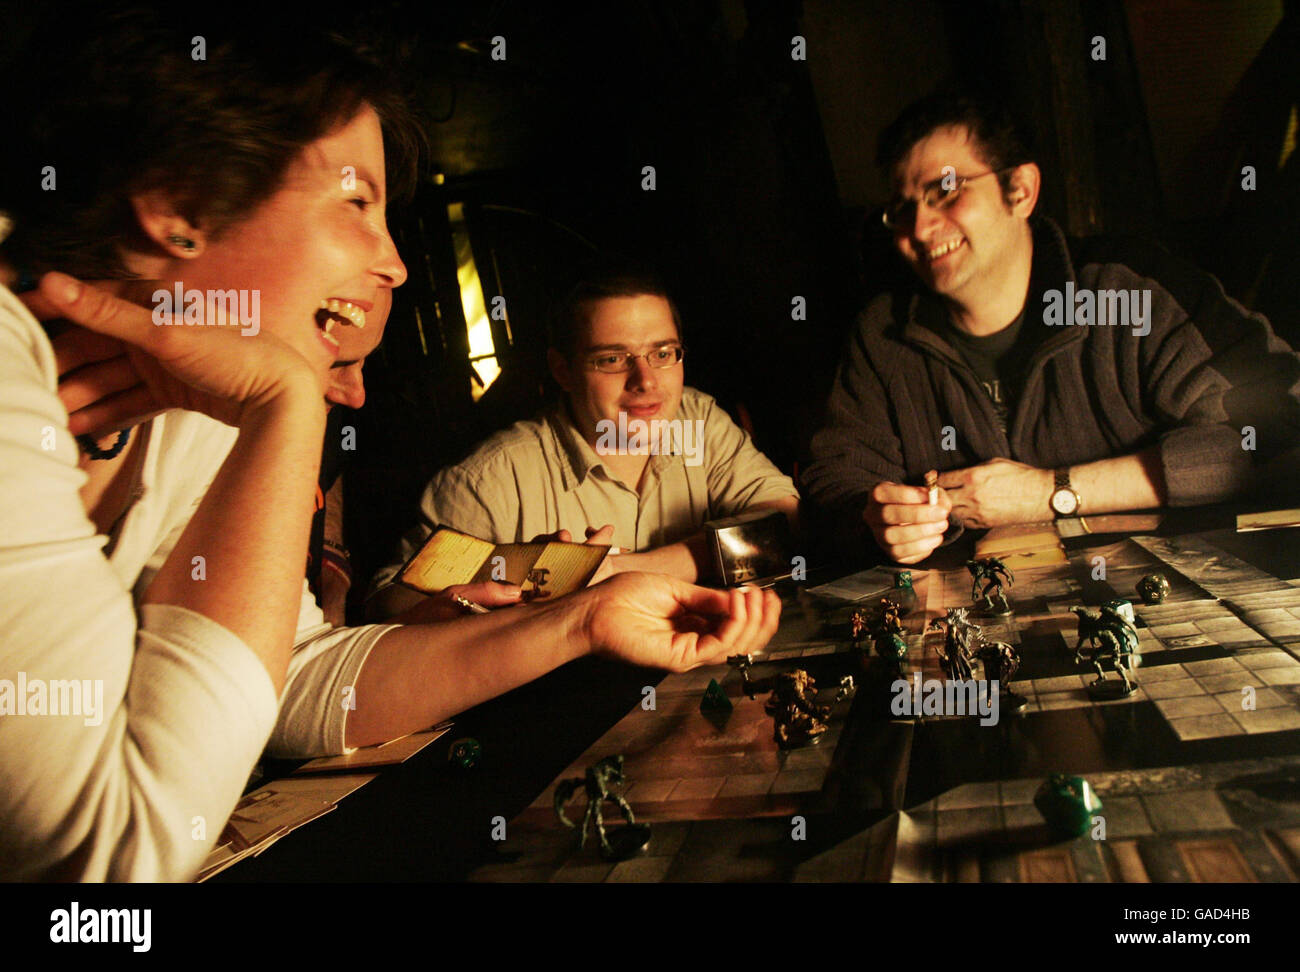 Gamers during the Worldwide Dungeons and Dragons Game Day event at the London Dungeon in south London. Stock Photo